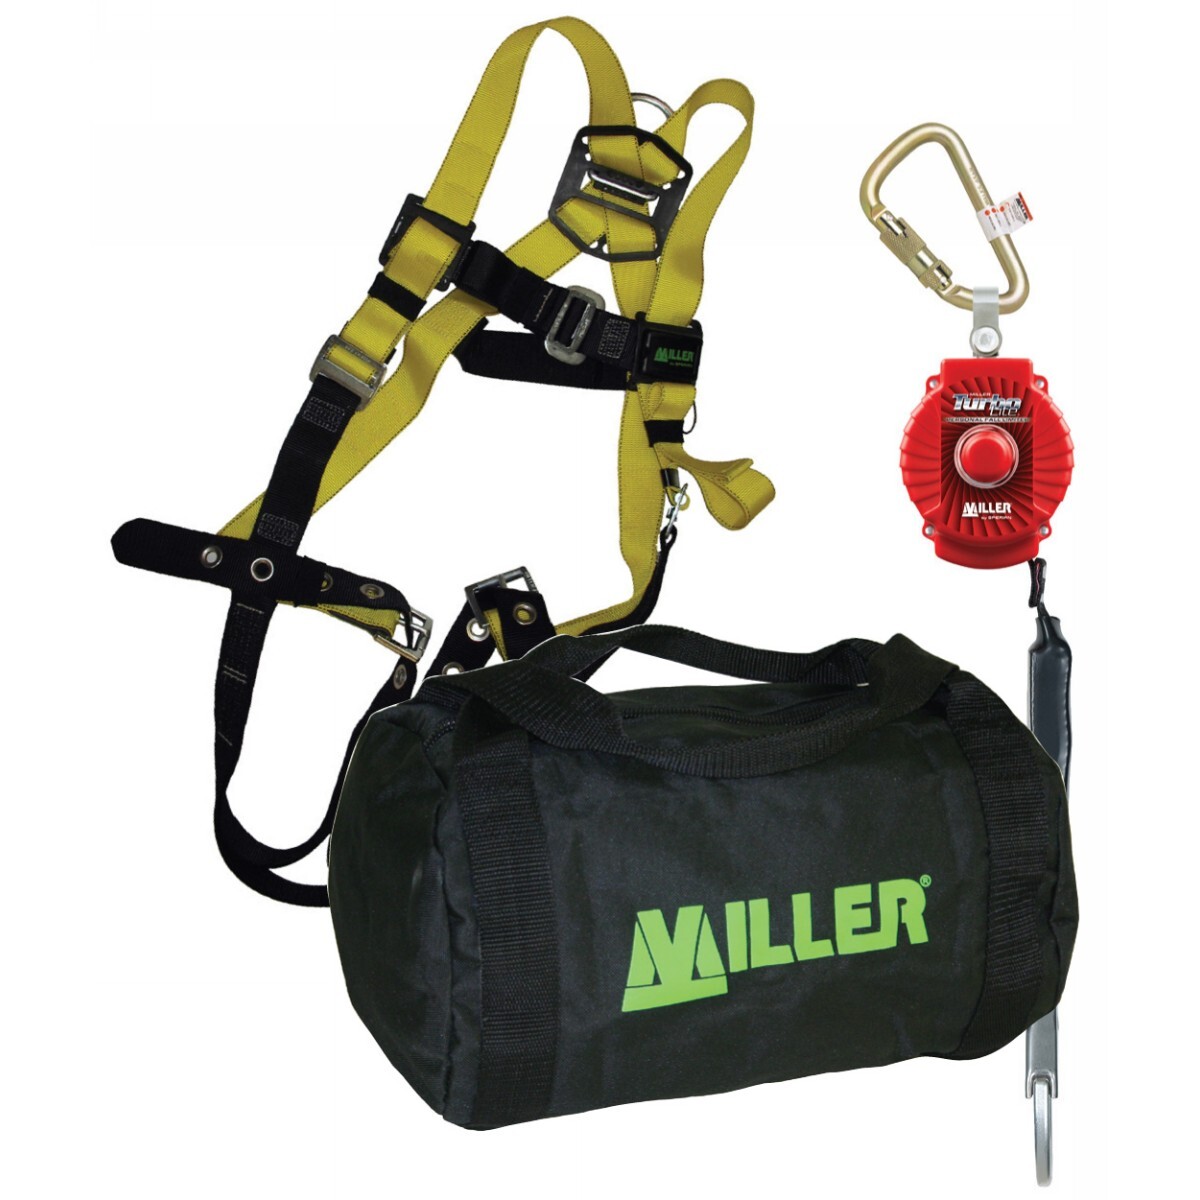 Honeywell Miller® TurboLite™  Personal Fall Limiter Aerial Lift Kit (Includes Harness, Personal Fall Limiter, Carabiner, Locking